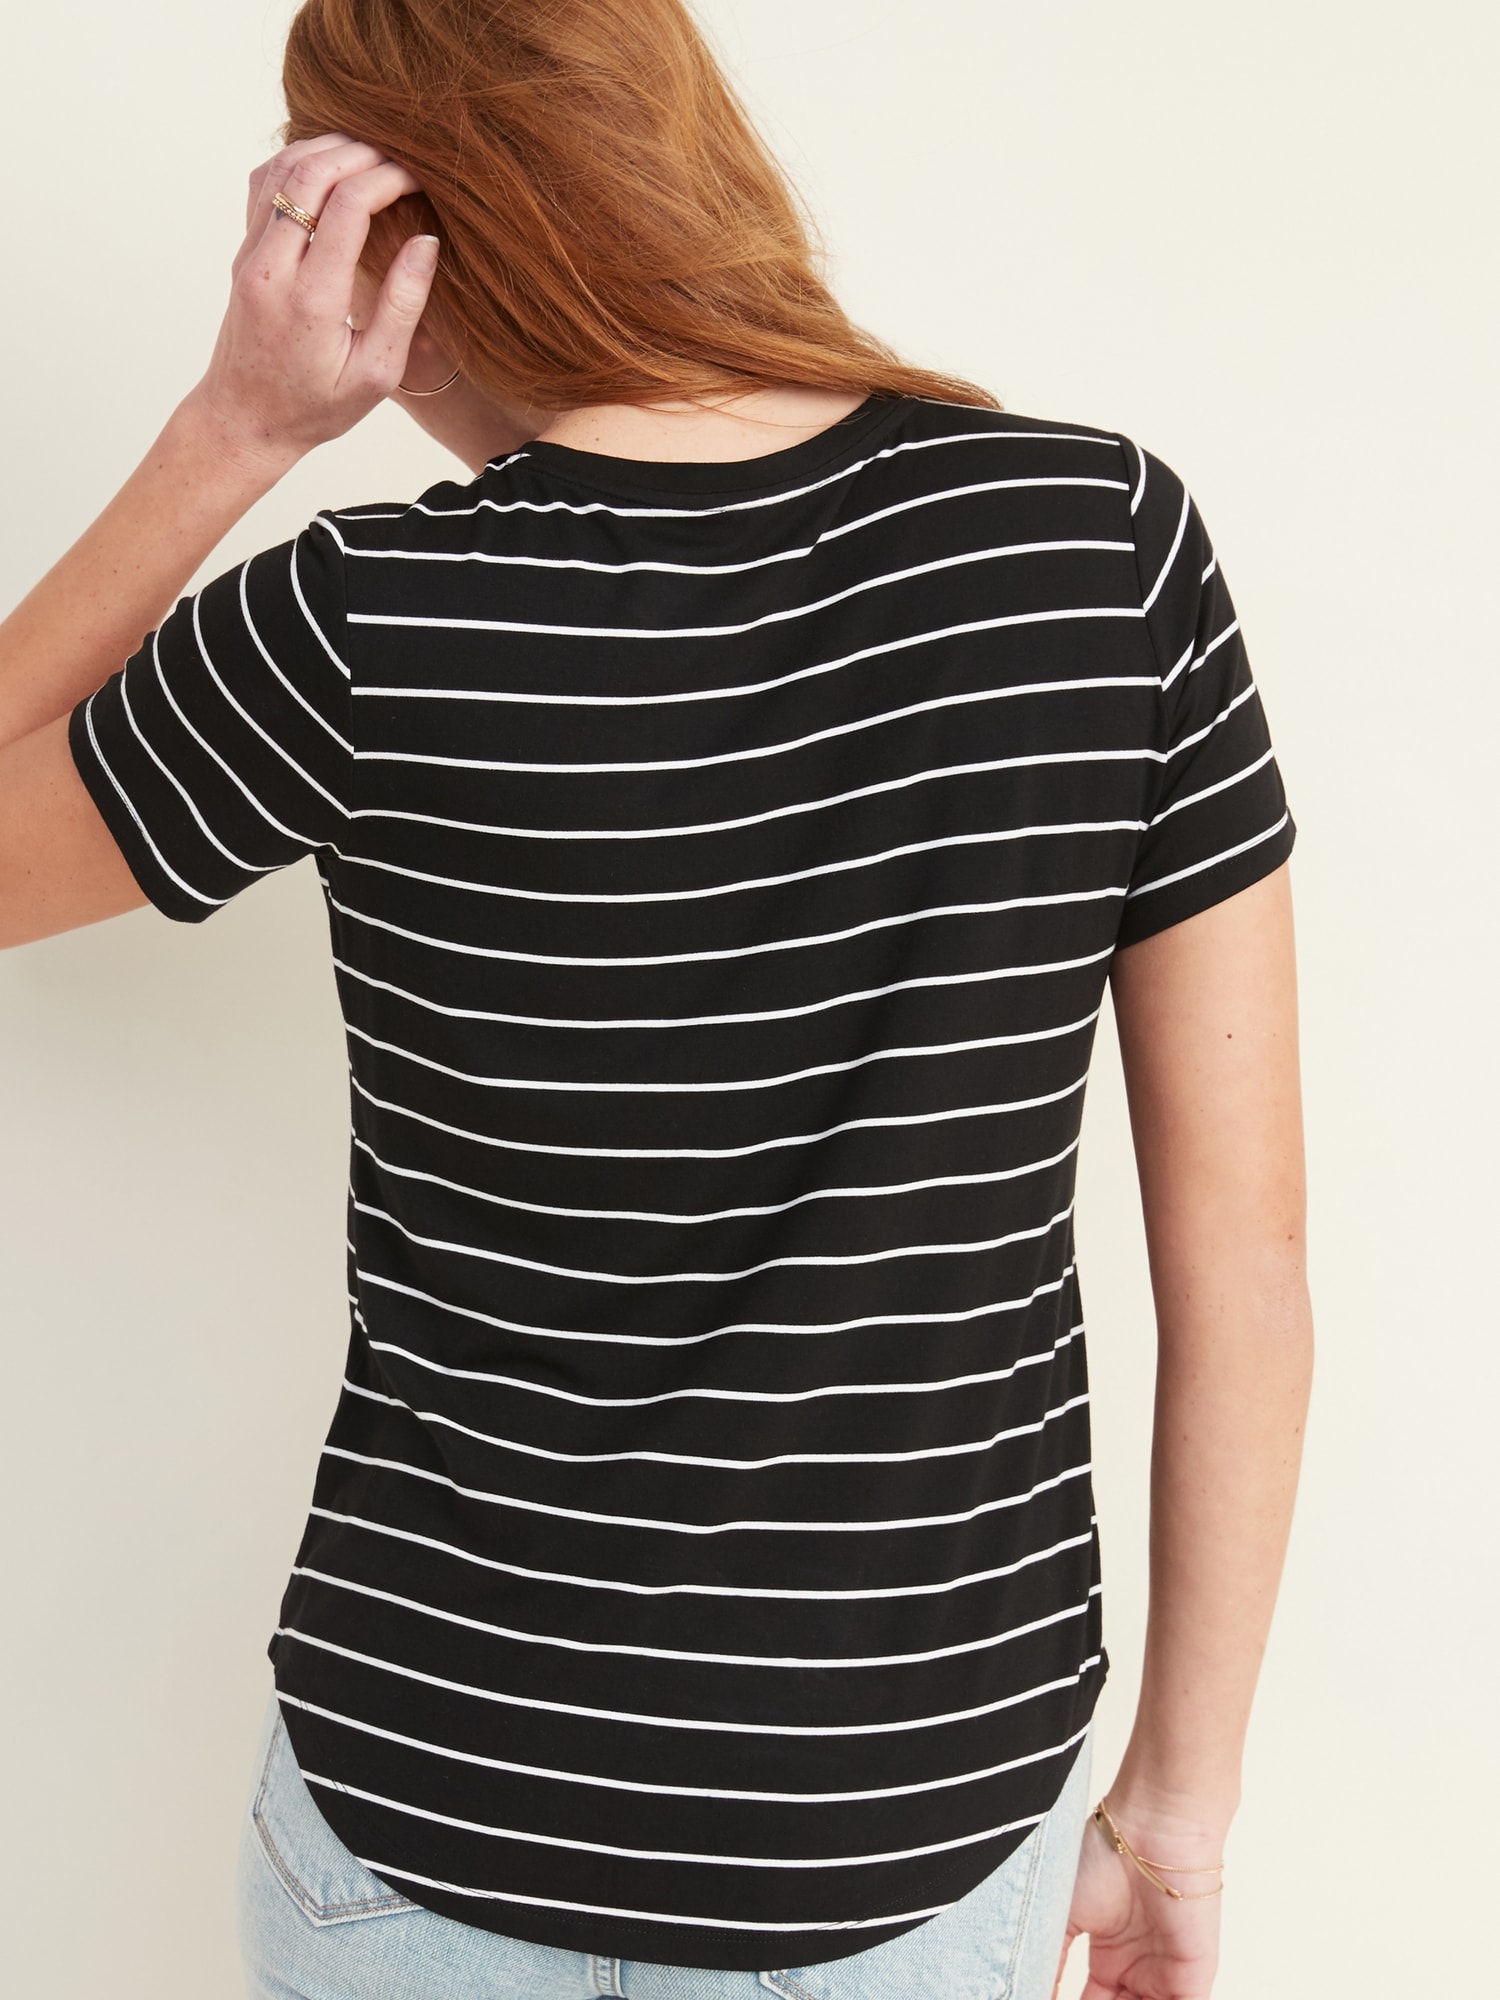 old navy black and white striped shirt